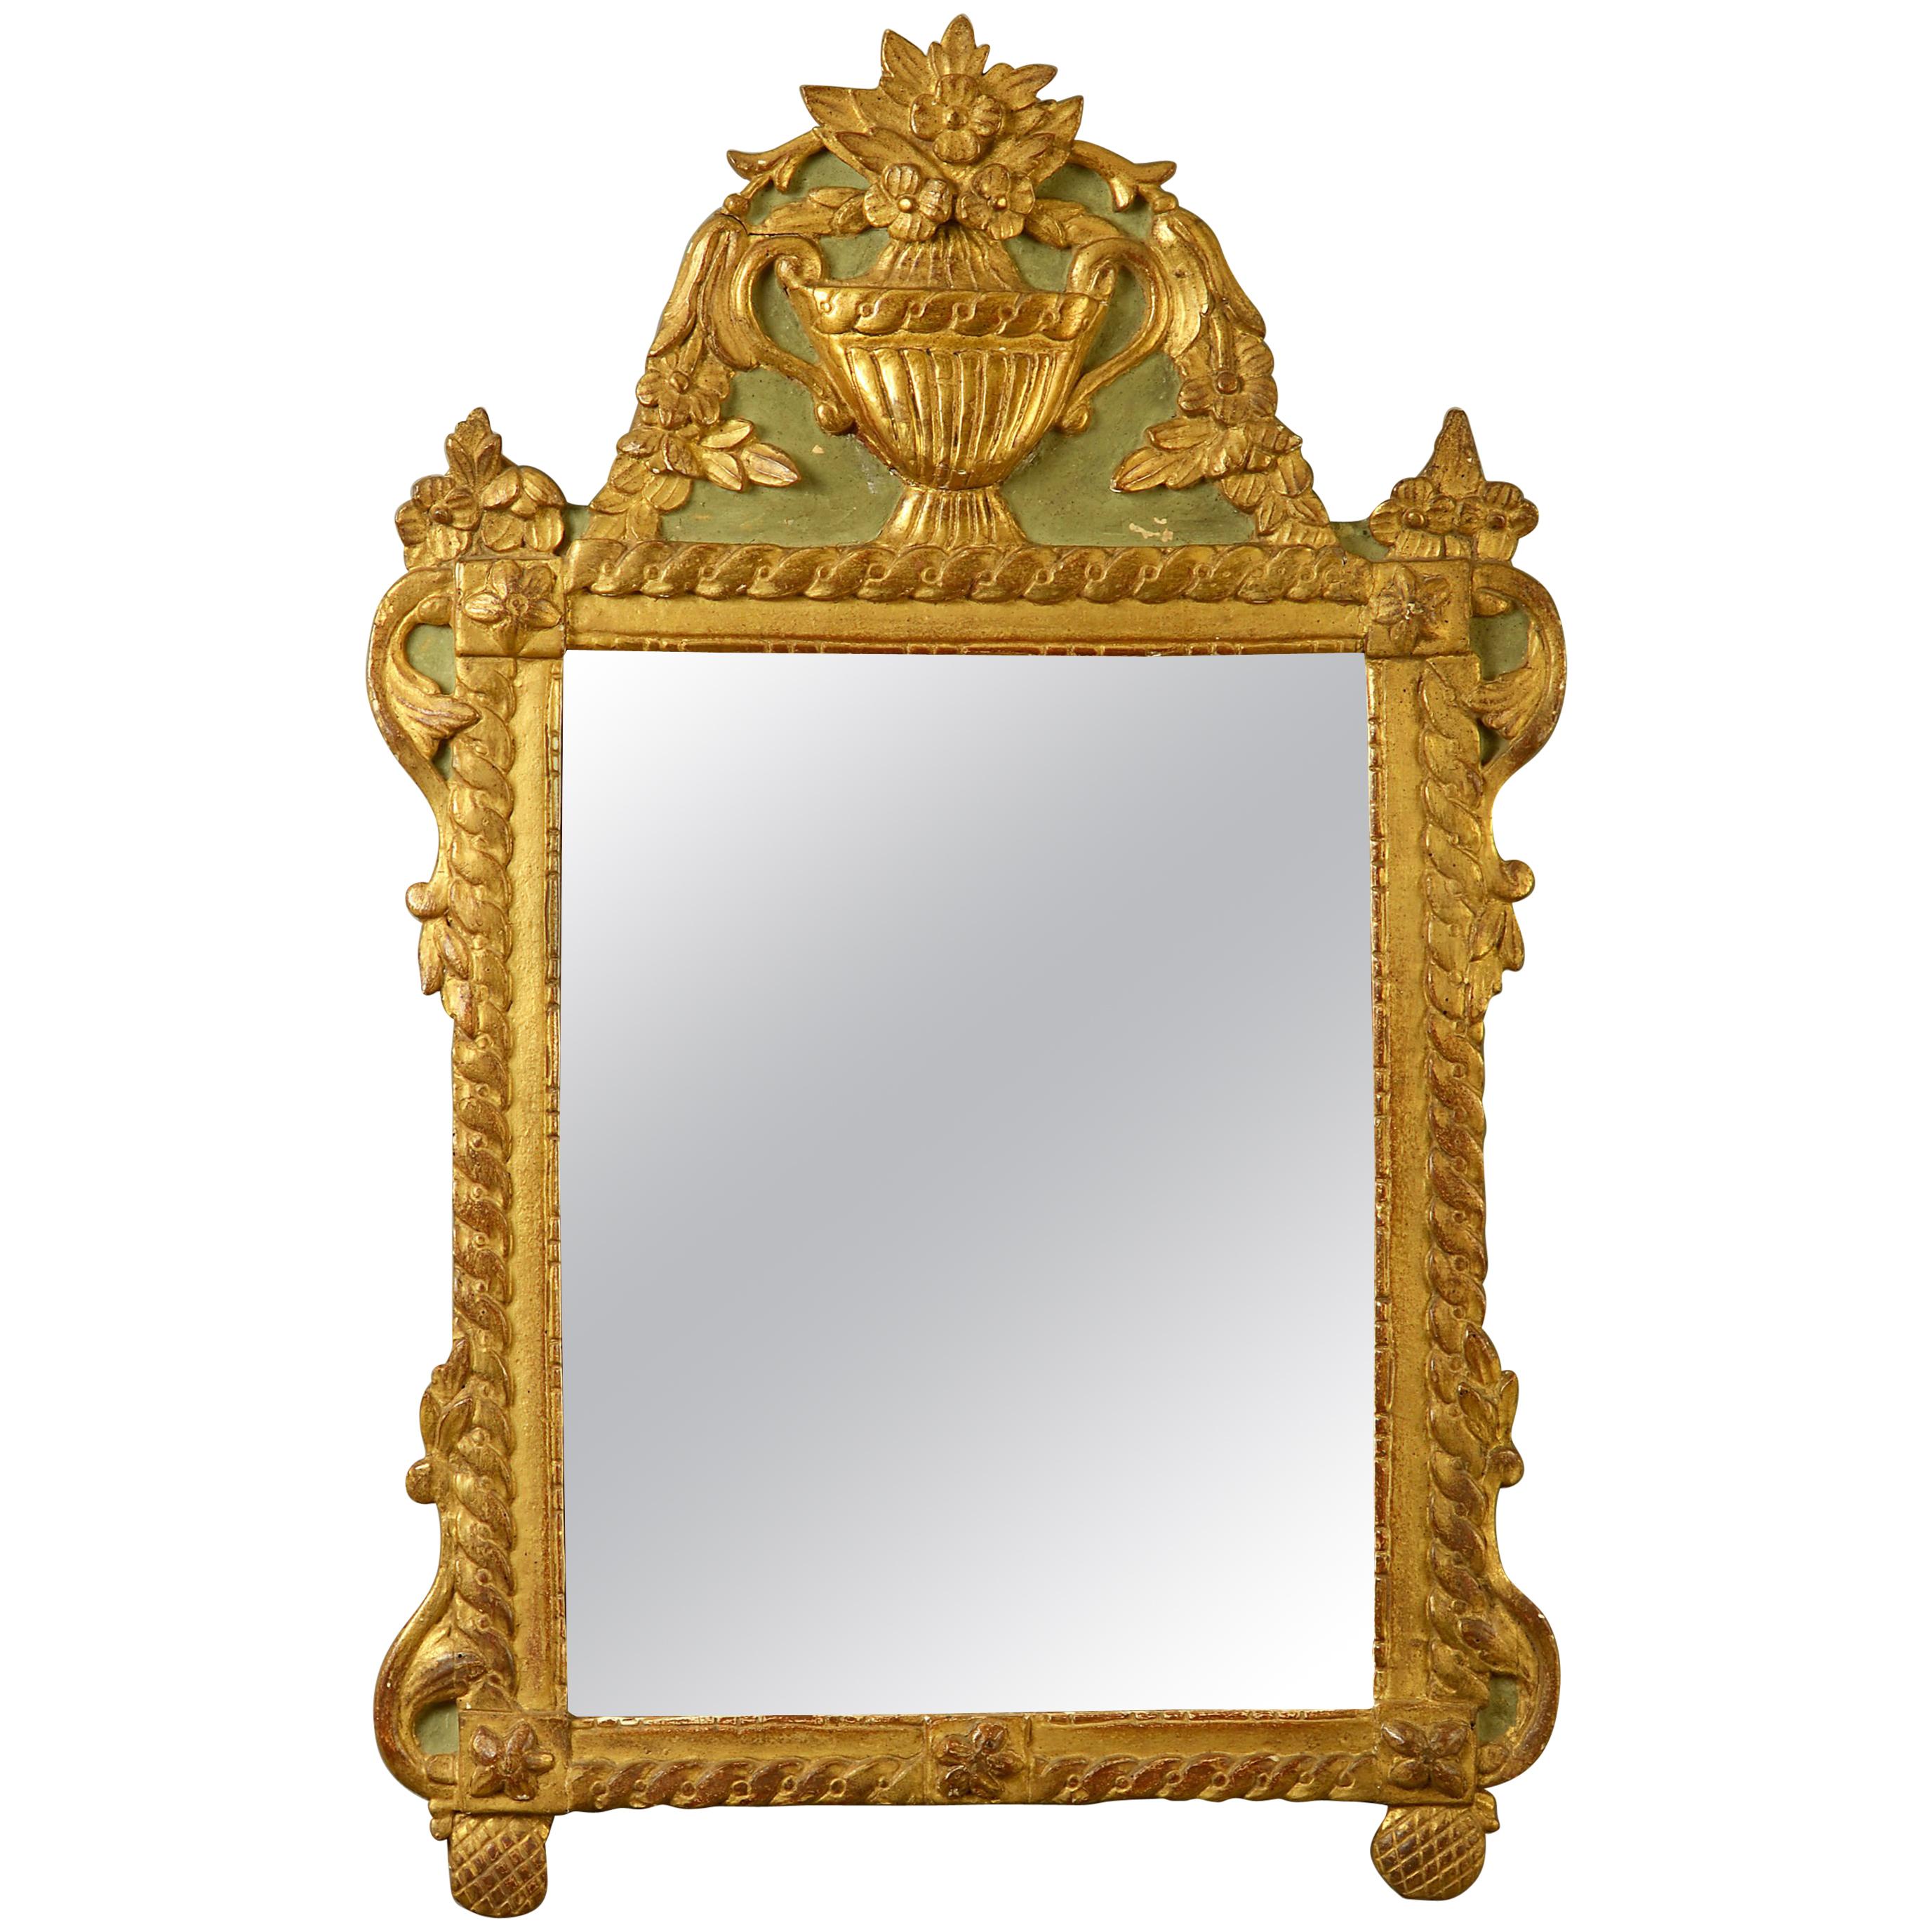 Early 20th Century Painted Parcel Gilded Mirror in Louis XVI Manner